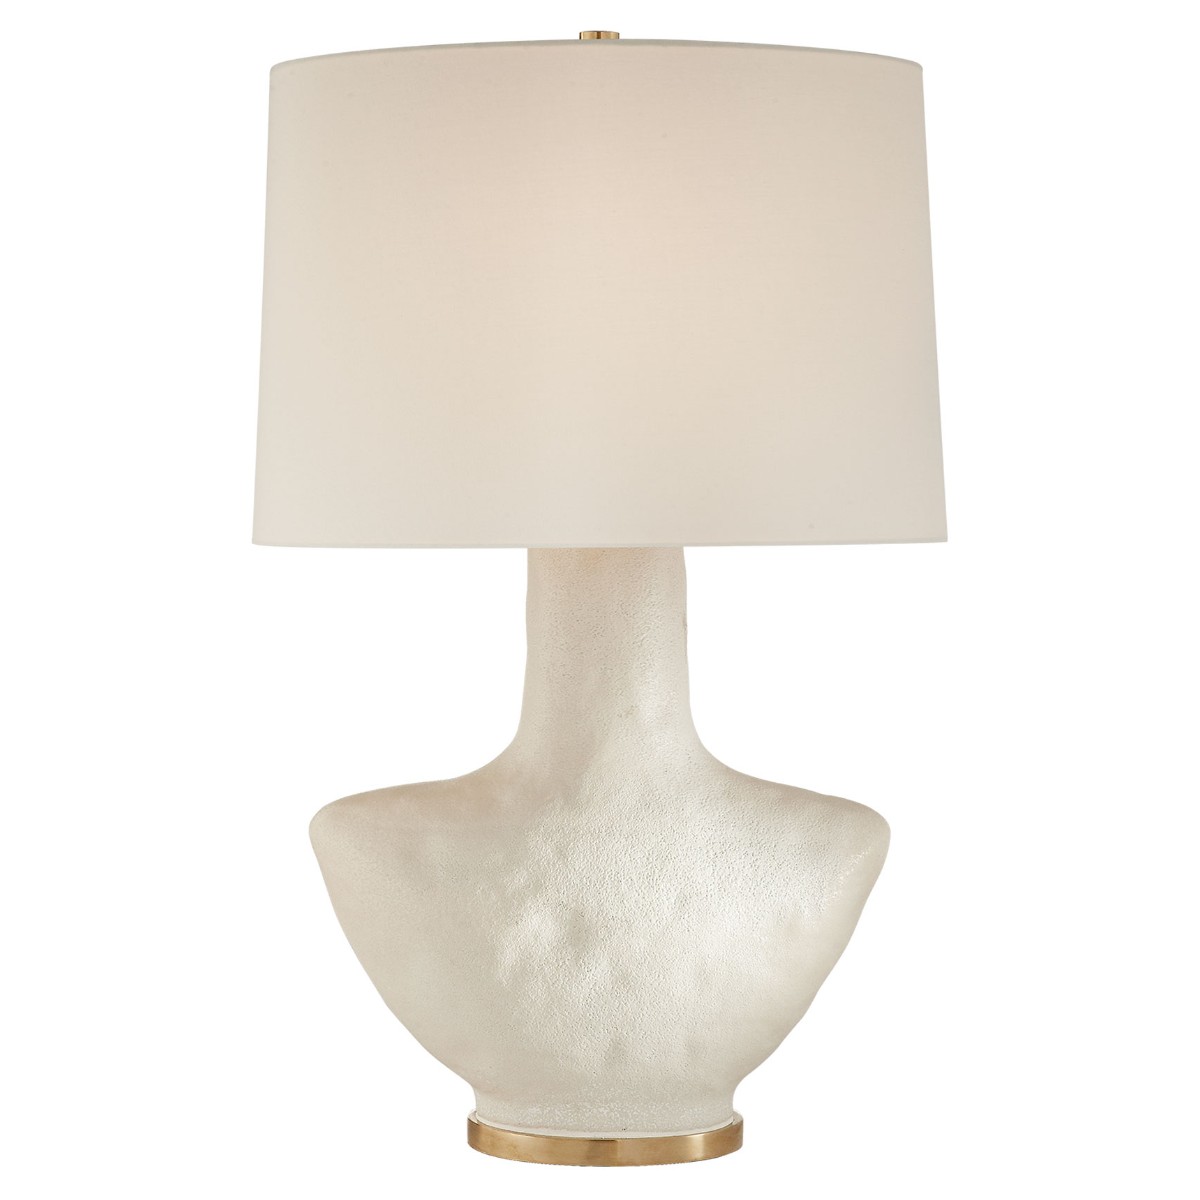 Kelly Wearstler | Armato Table Lamp | White with White Linen Shade